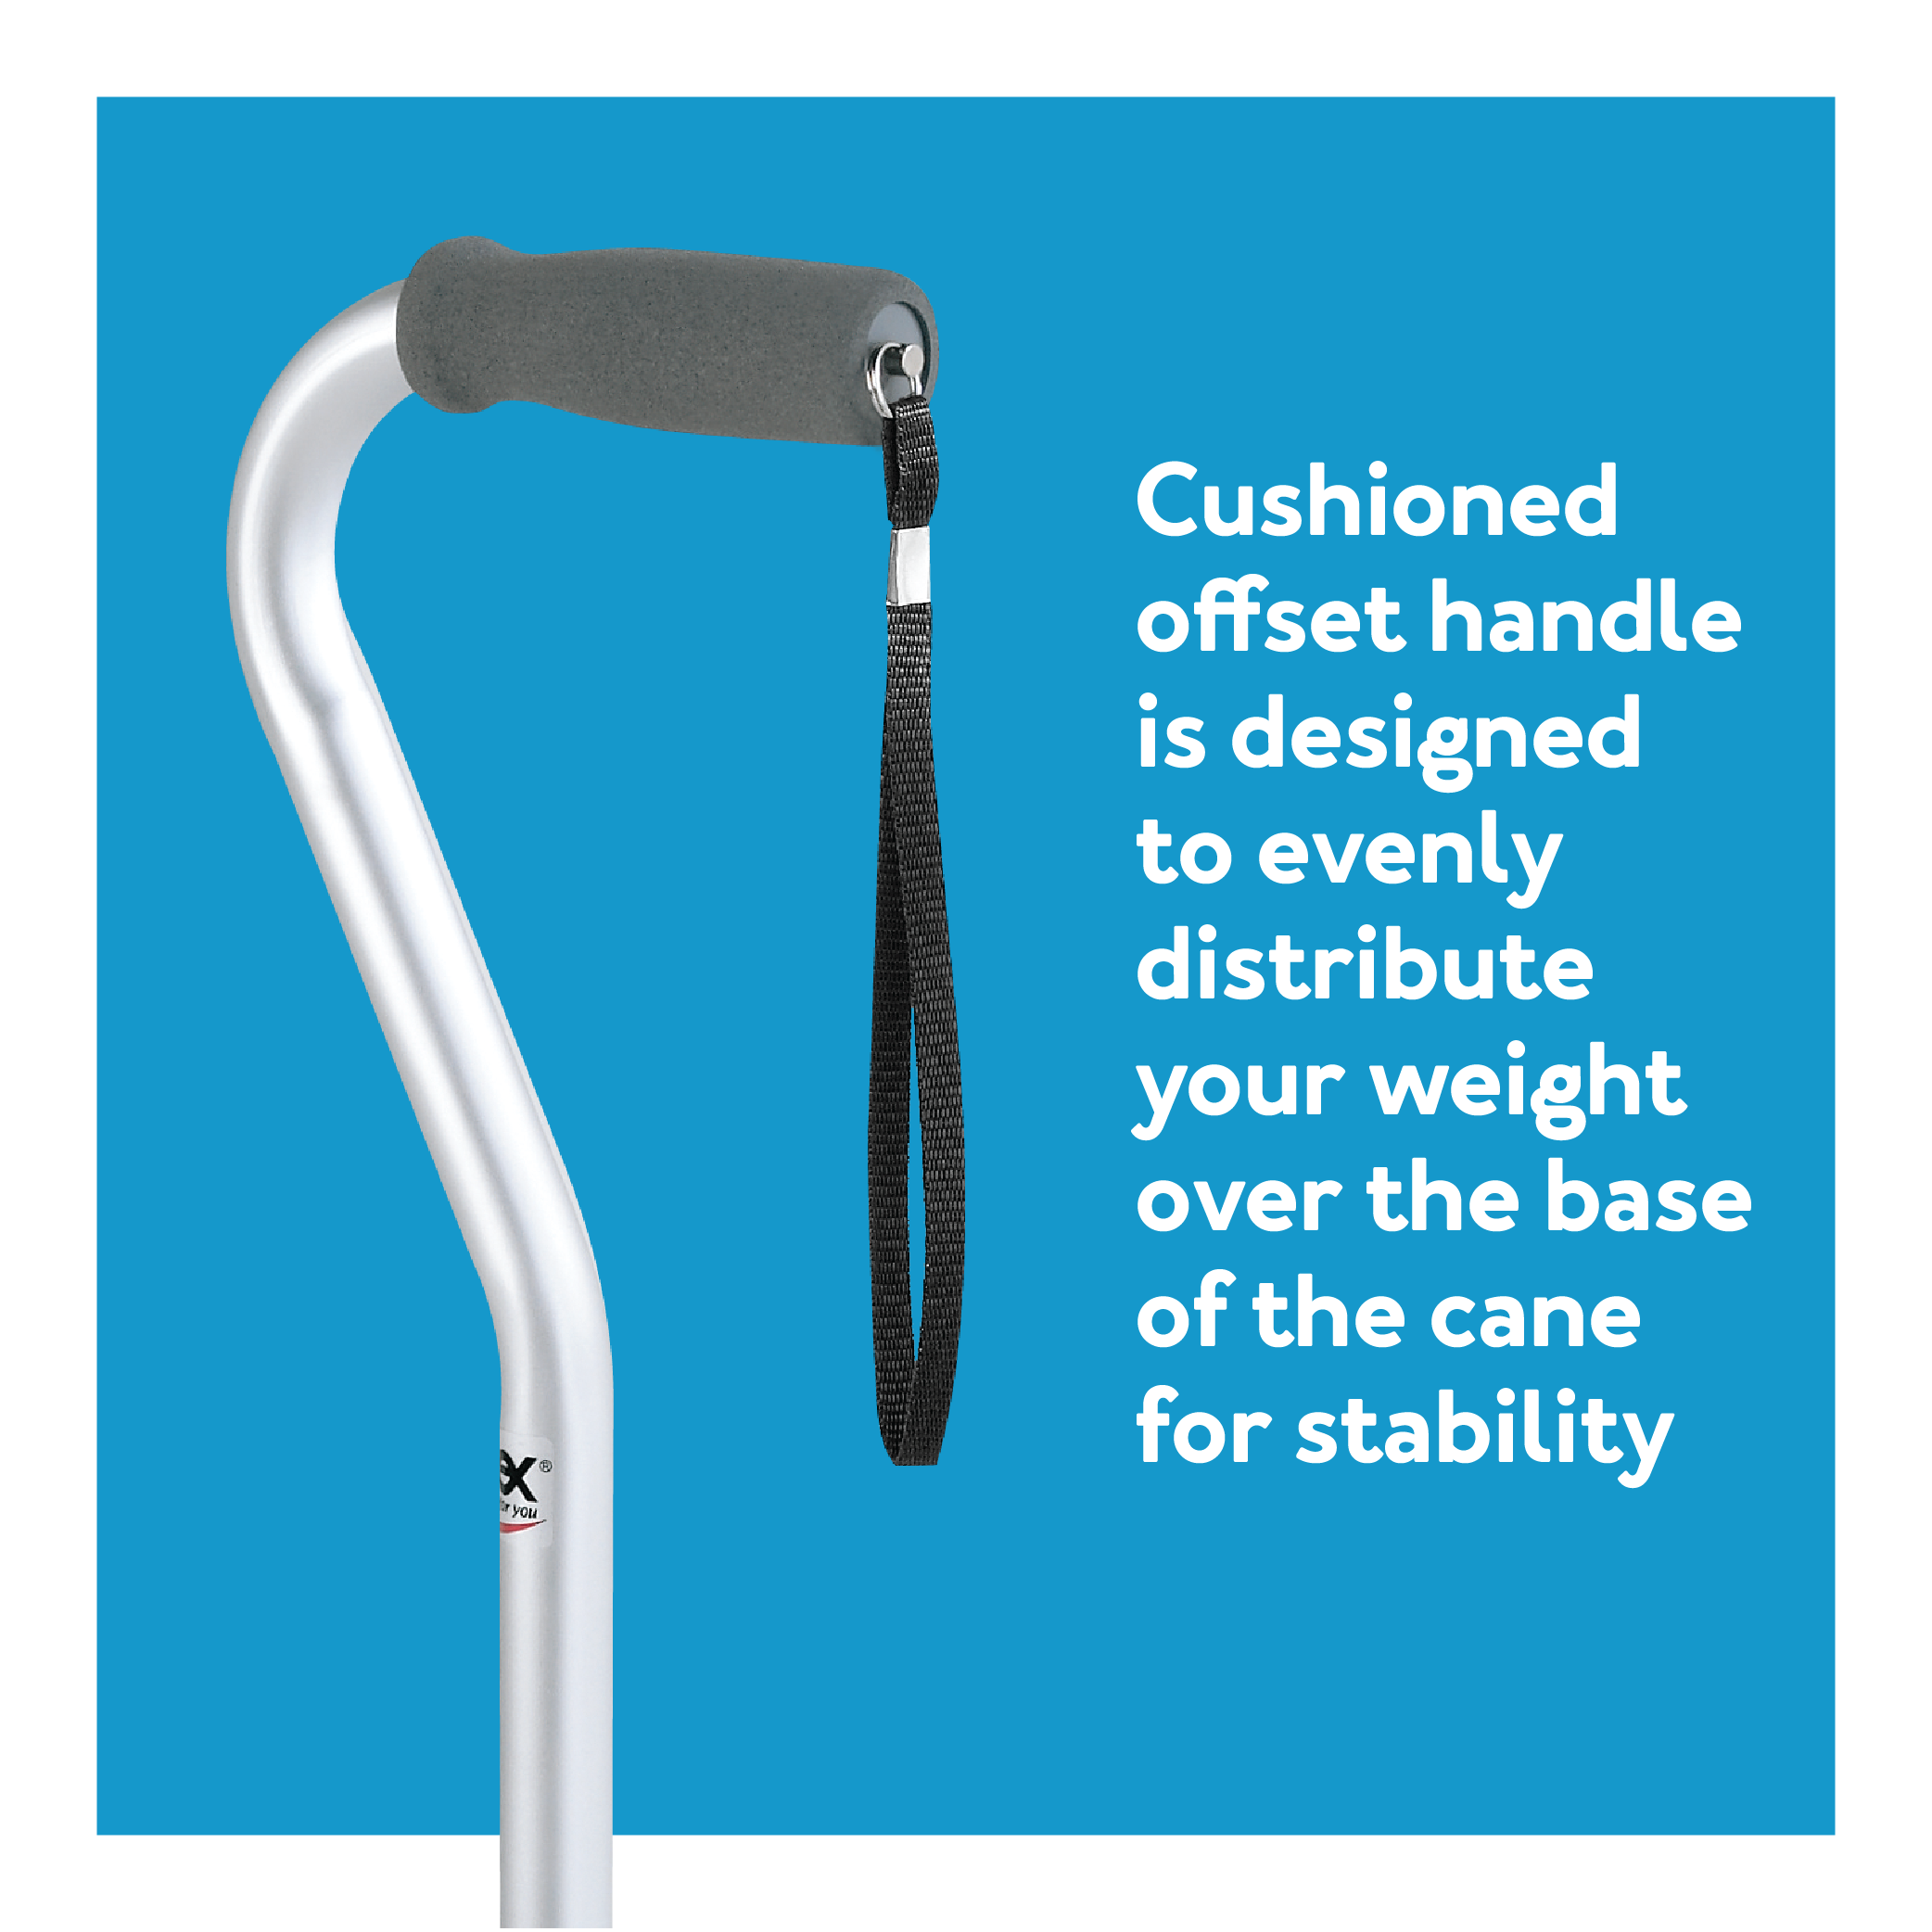 Carex Adjustable Walking Cane with Offset Handle for All Occasions, Cushioned Grip, Black, 250 lb Capacity - image 4 of 9